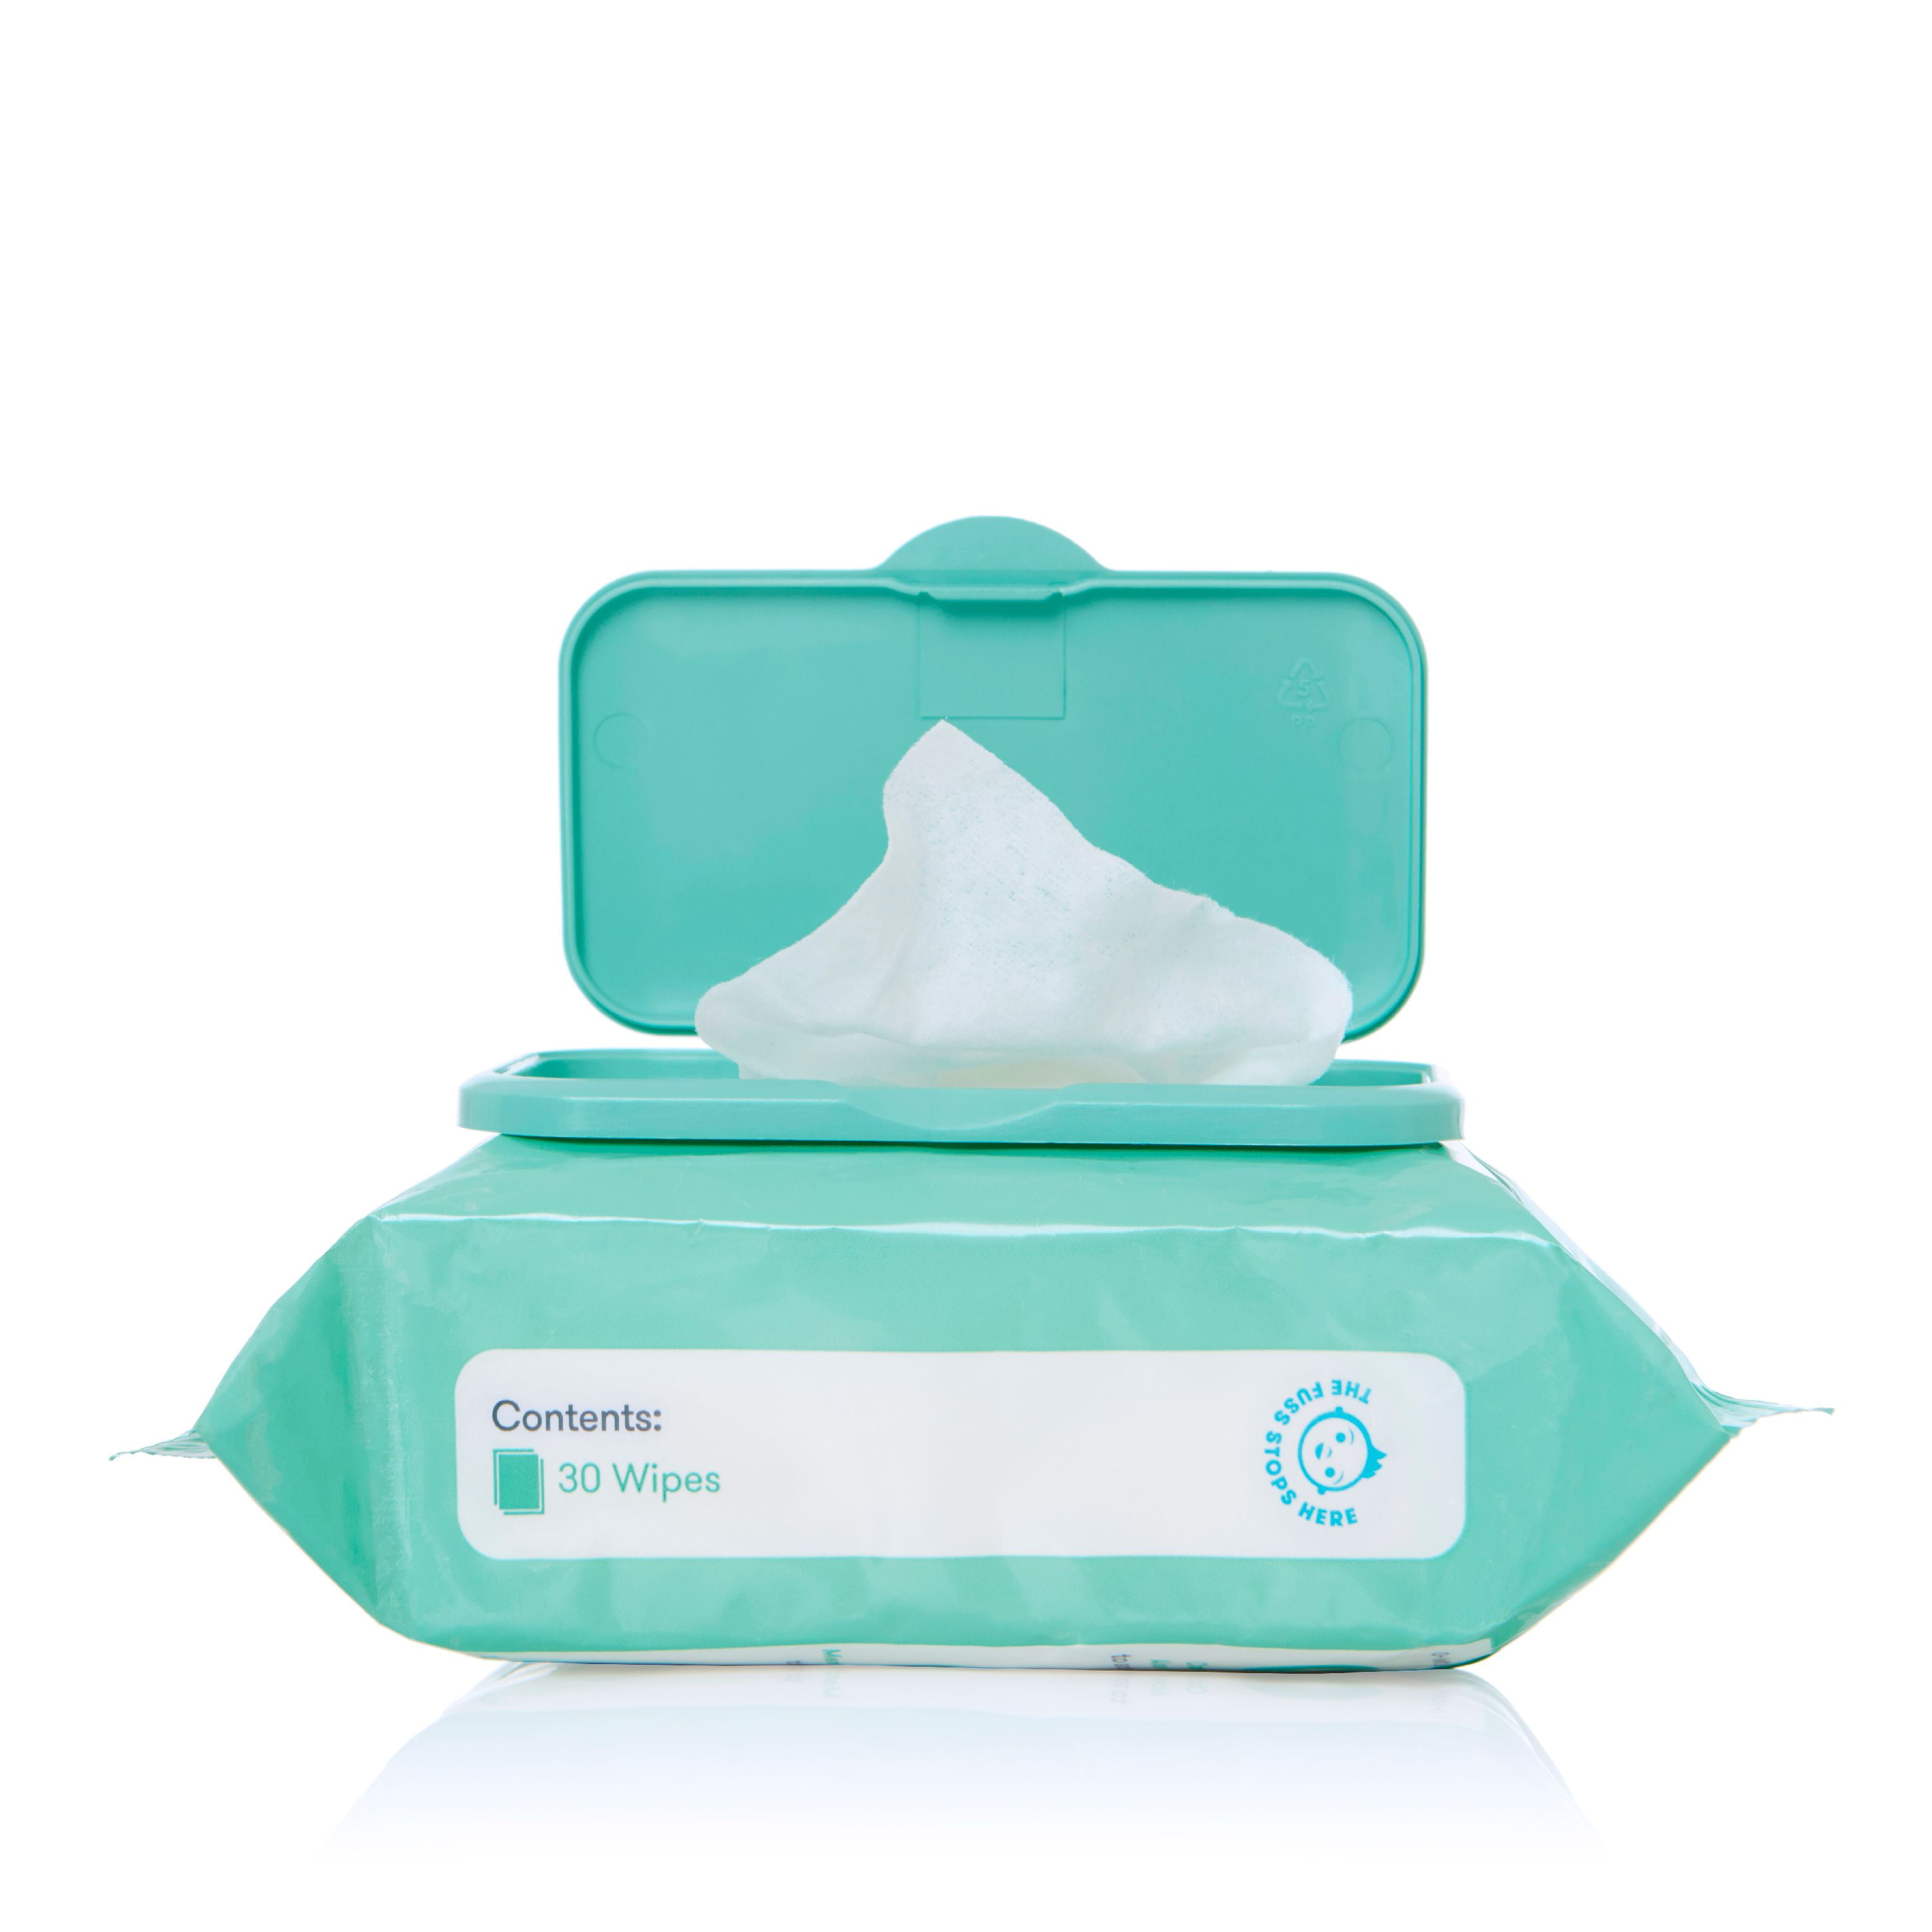 Baby Products Online - Breathefrida Nose or Chest Steam Wipes by Frida Baby  30 Count (Pack of - Kideno